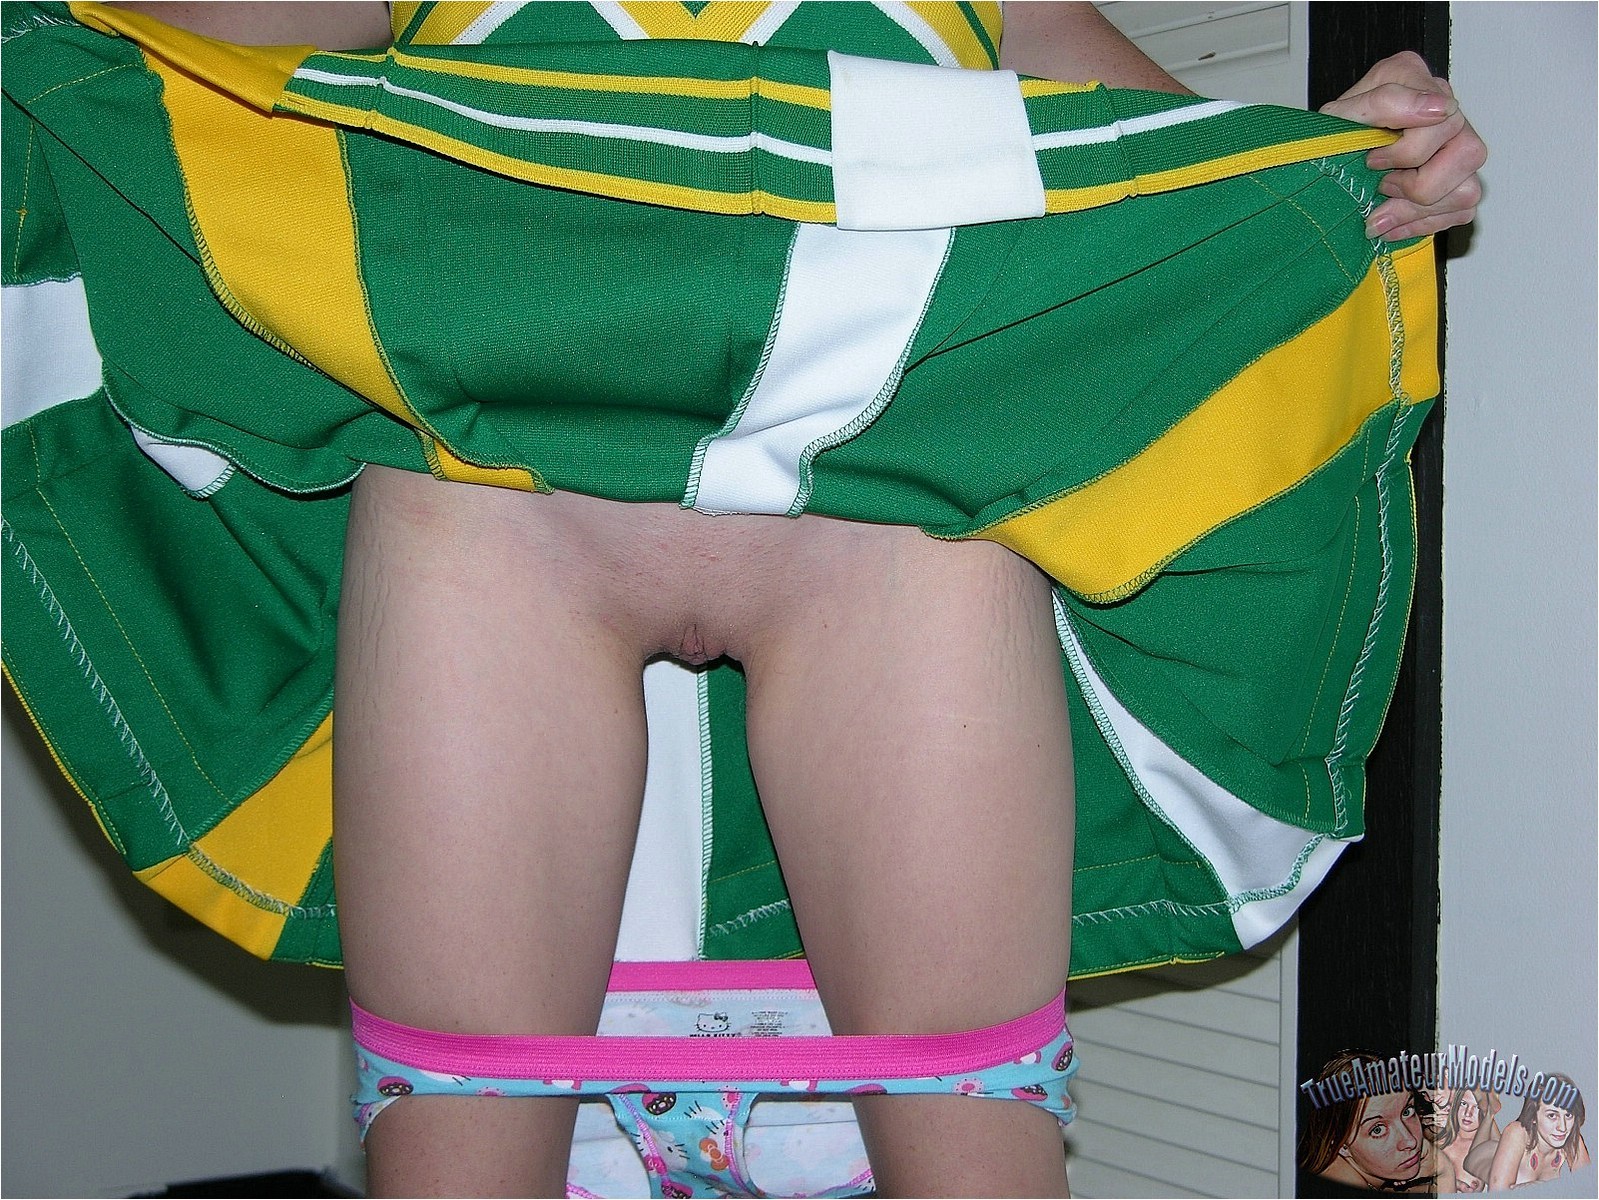 Cheerleader Spreads Sweaty Butthole After The Football Game!  #67208368